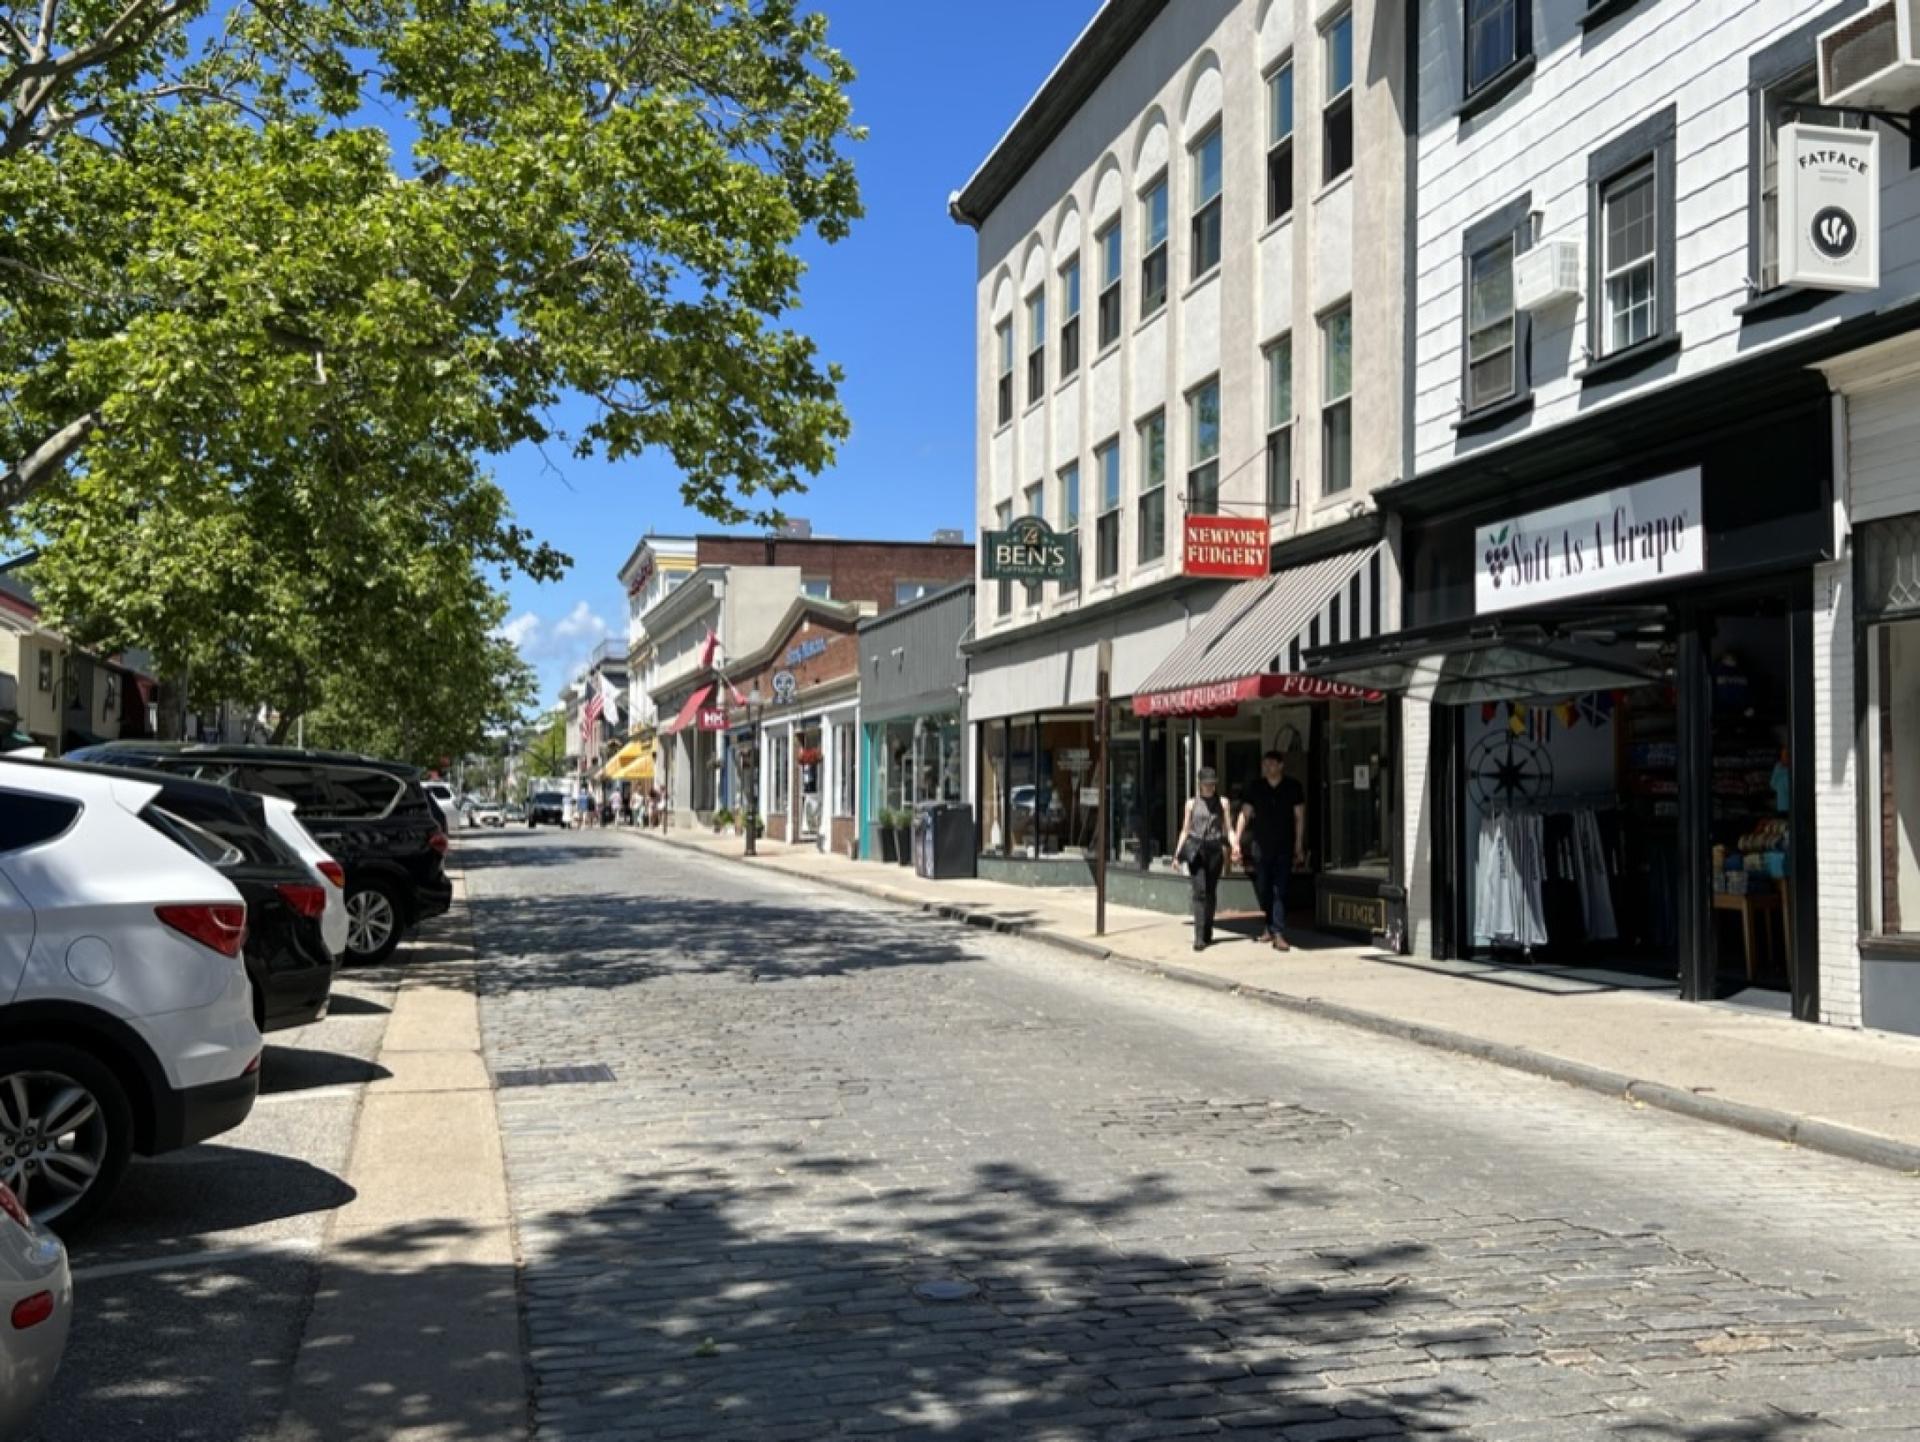 Tourist towns like Newport, Rhode Island rely heavily on international workers on work visas.